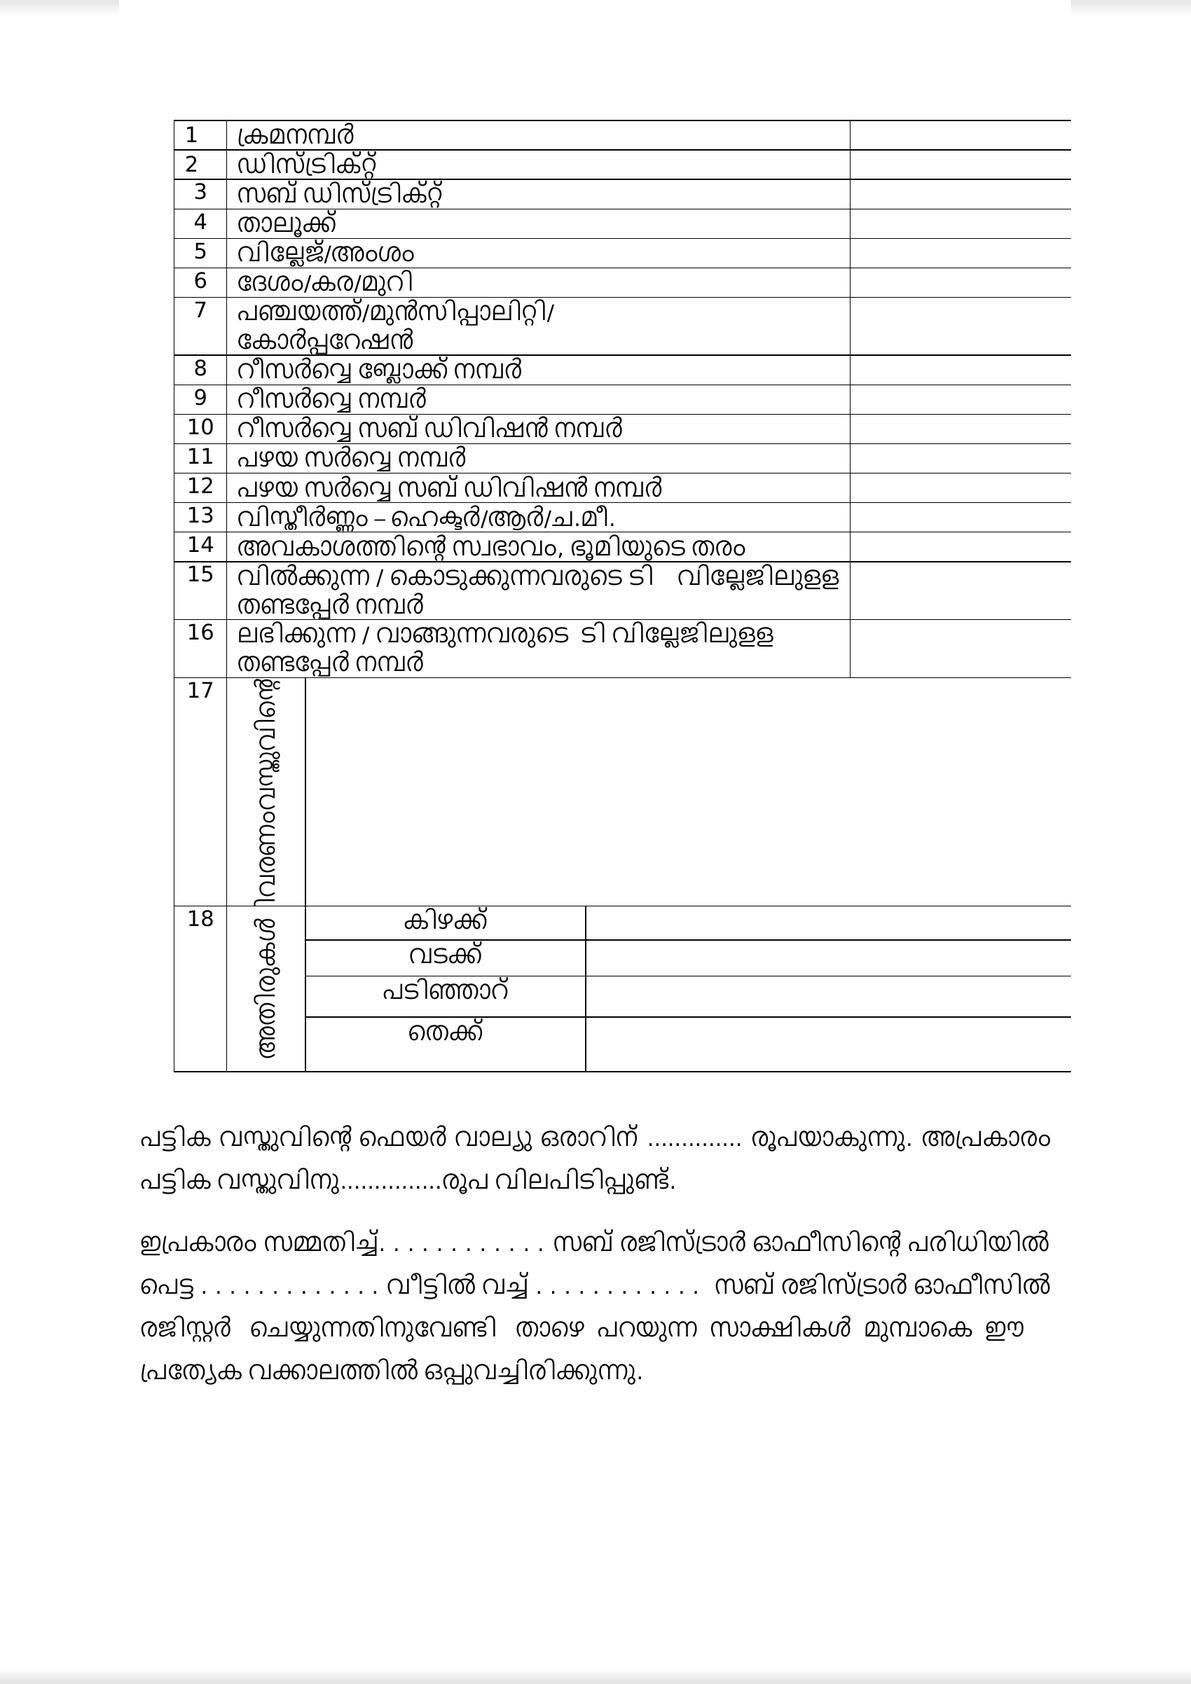 Special power of attorney - In malayalam Language -1